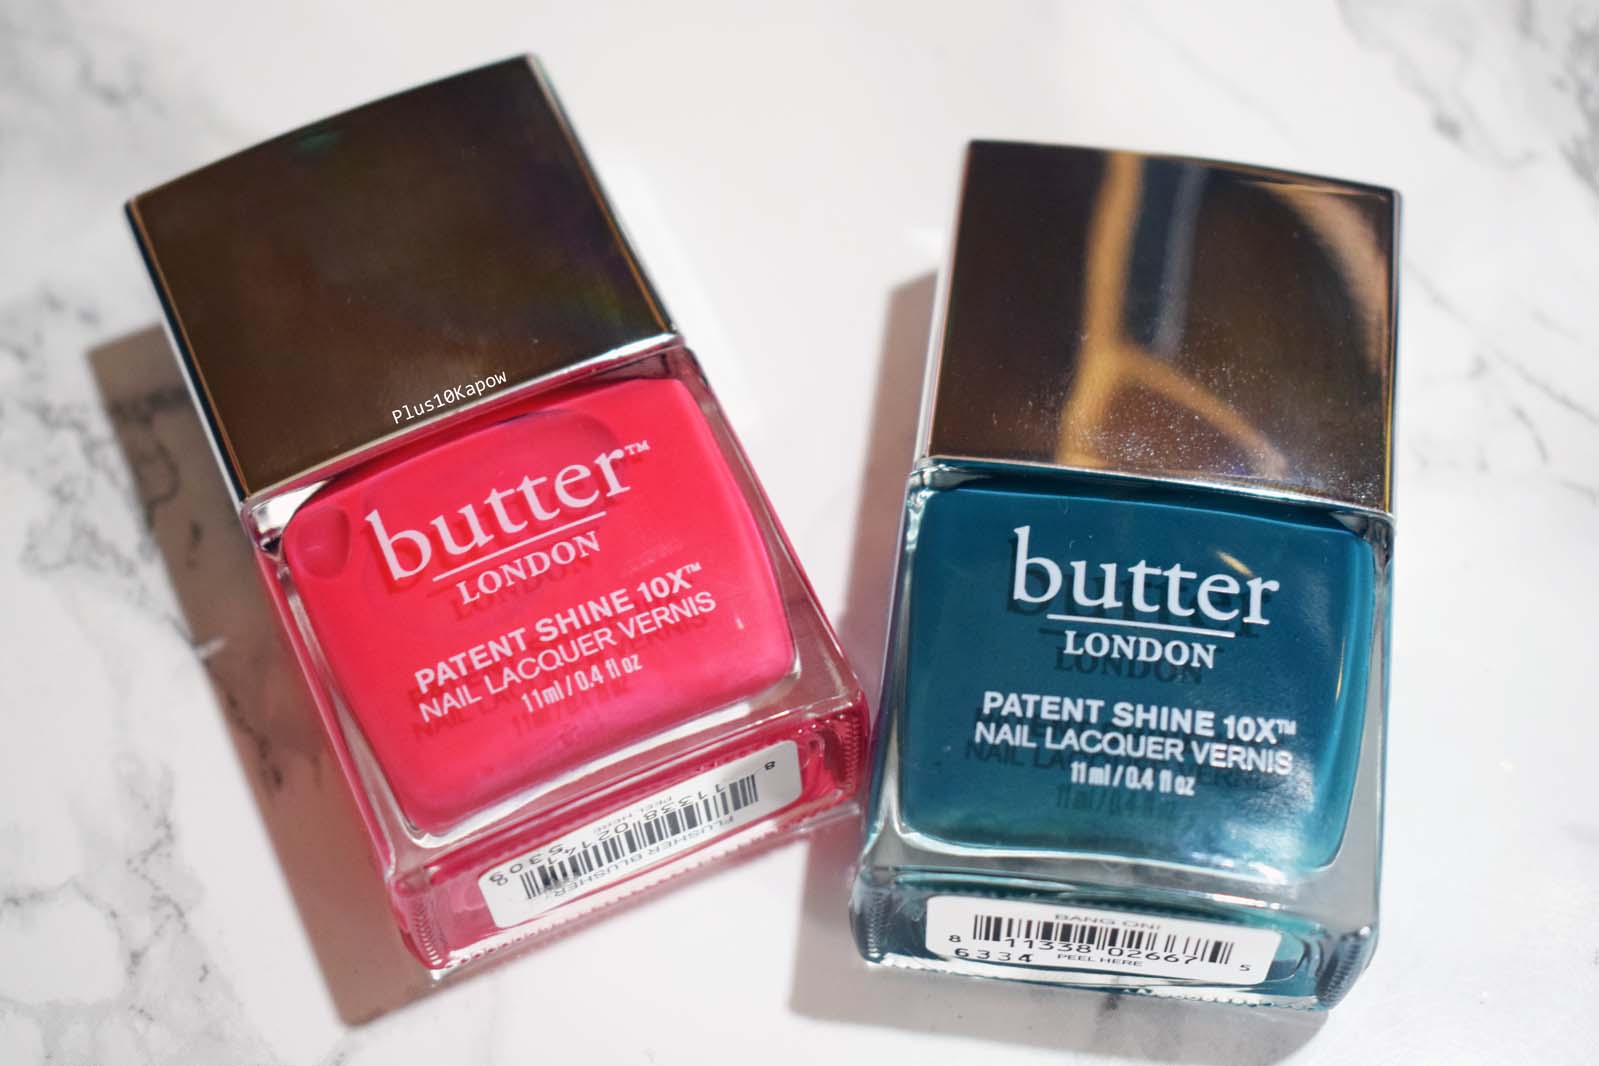 7. Butter London Patent Shine 10X Nail Lacquer in "Fairy Lights" - wide 5